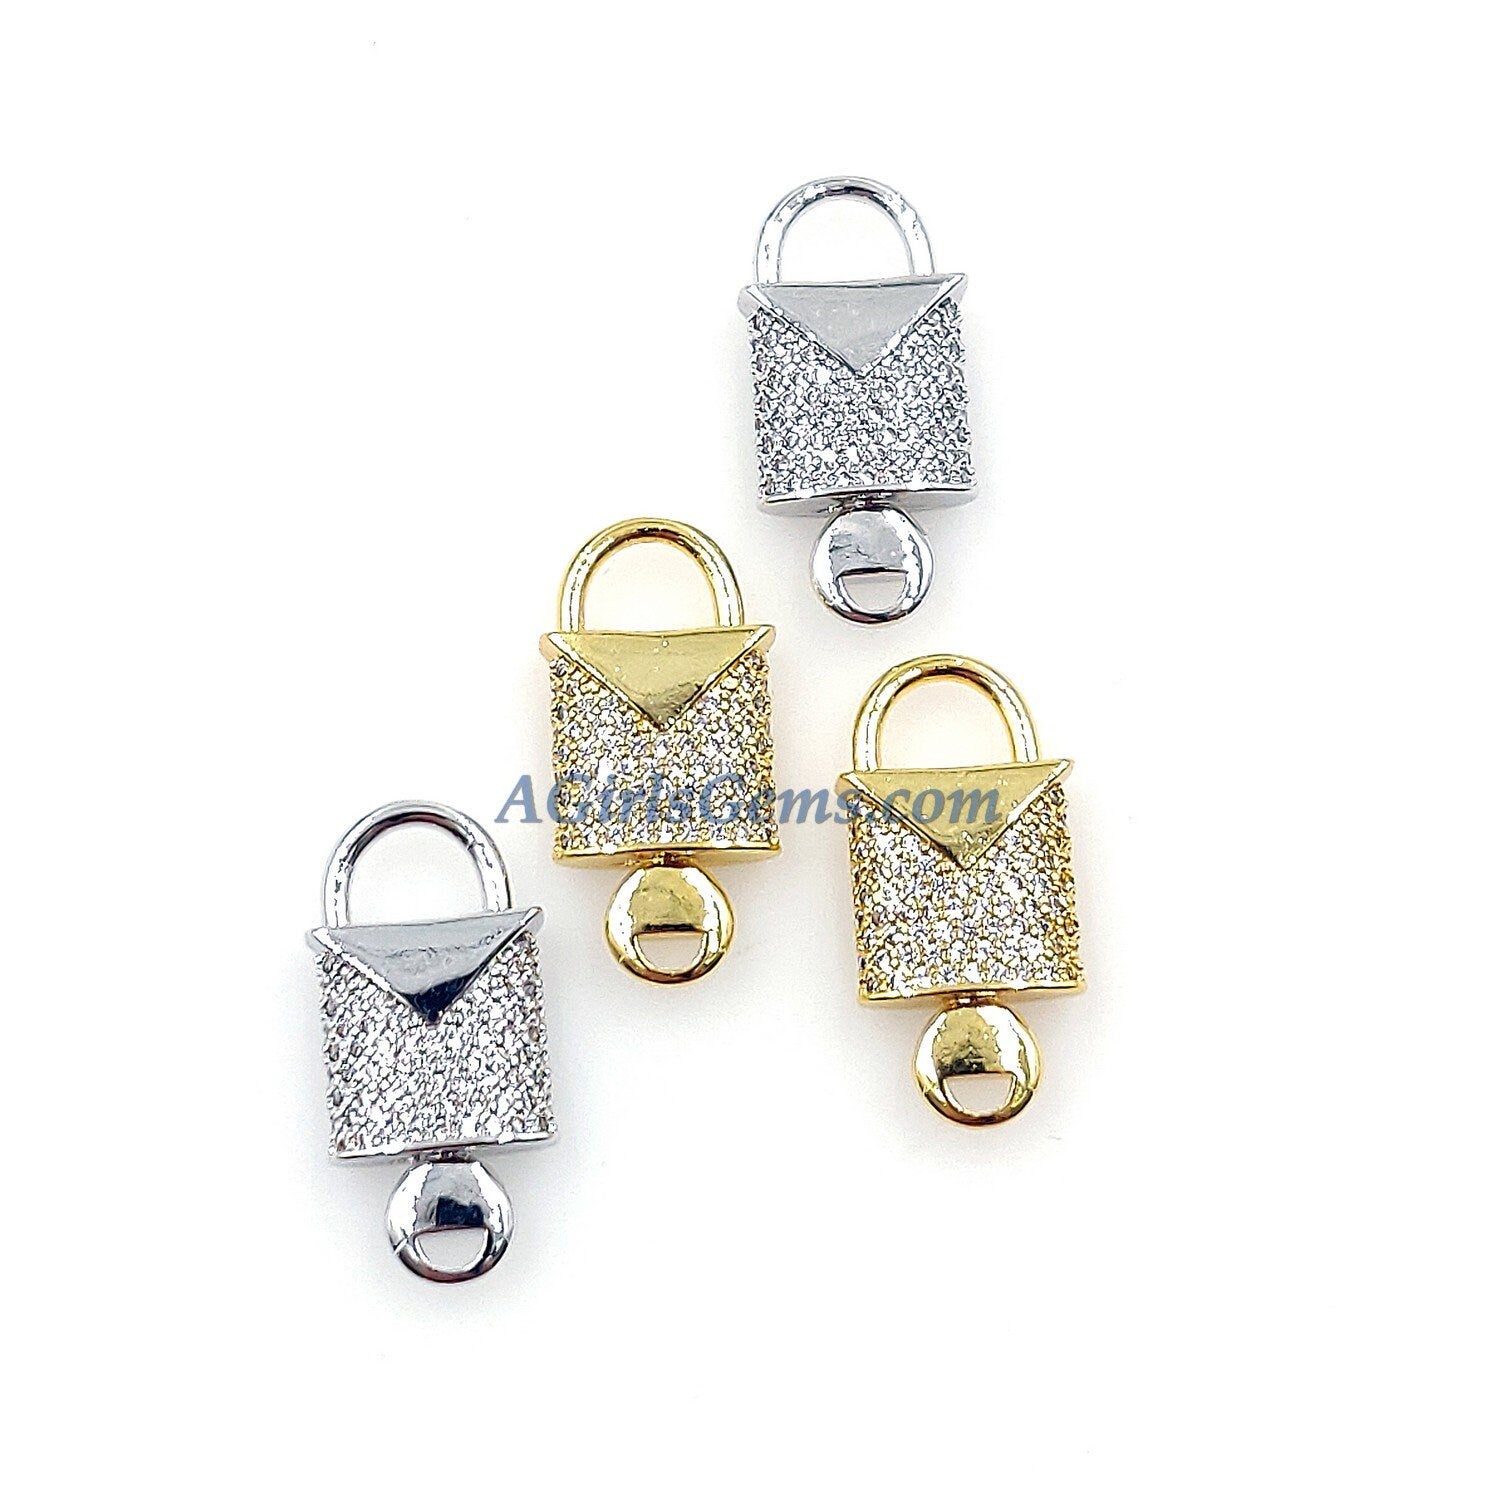 CZ Micro Pave Lock and Key Connectors, 18 k Gold Plated 11 x 24 mm, Silver Lock Key Charms